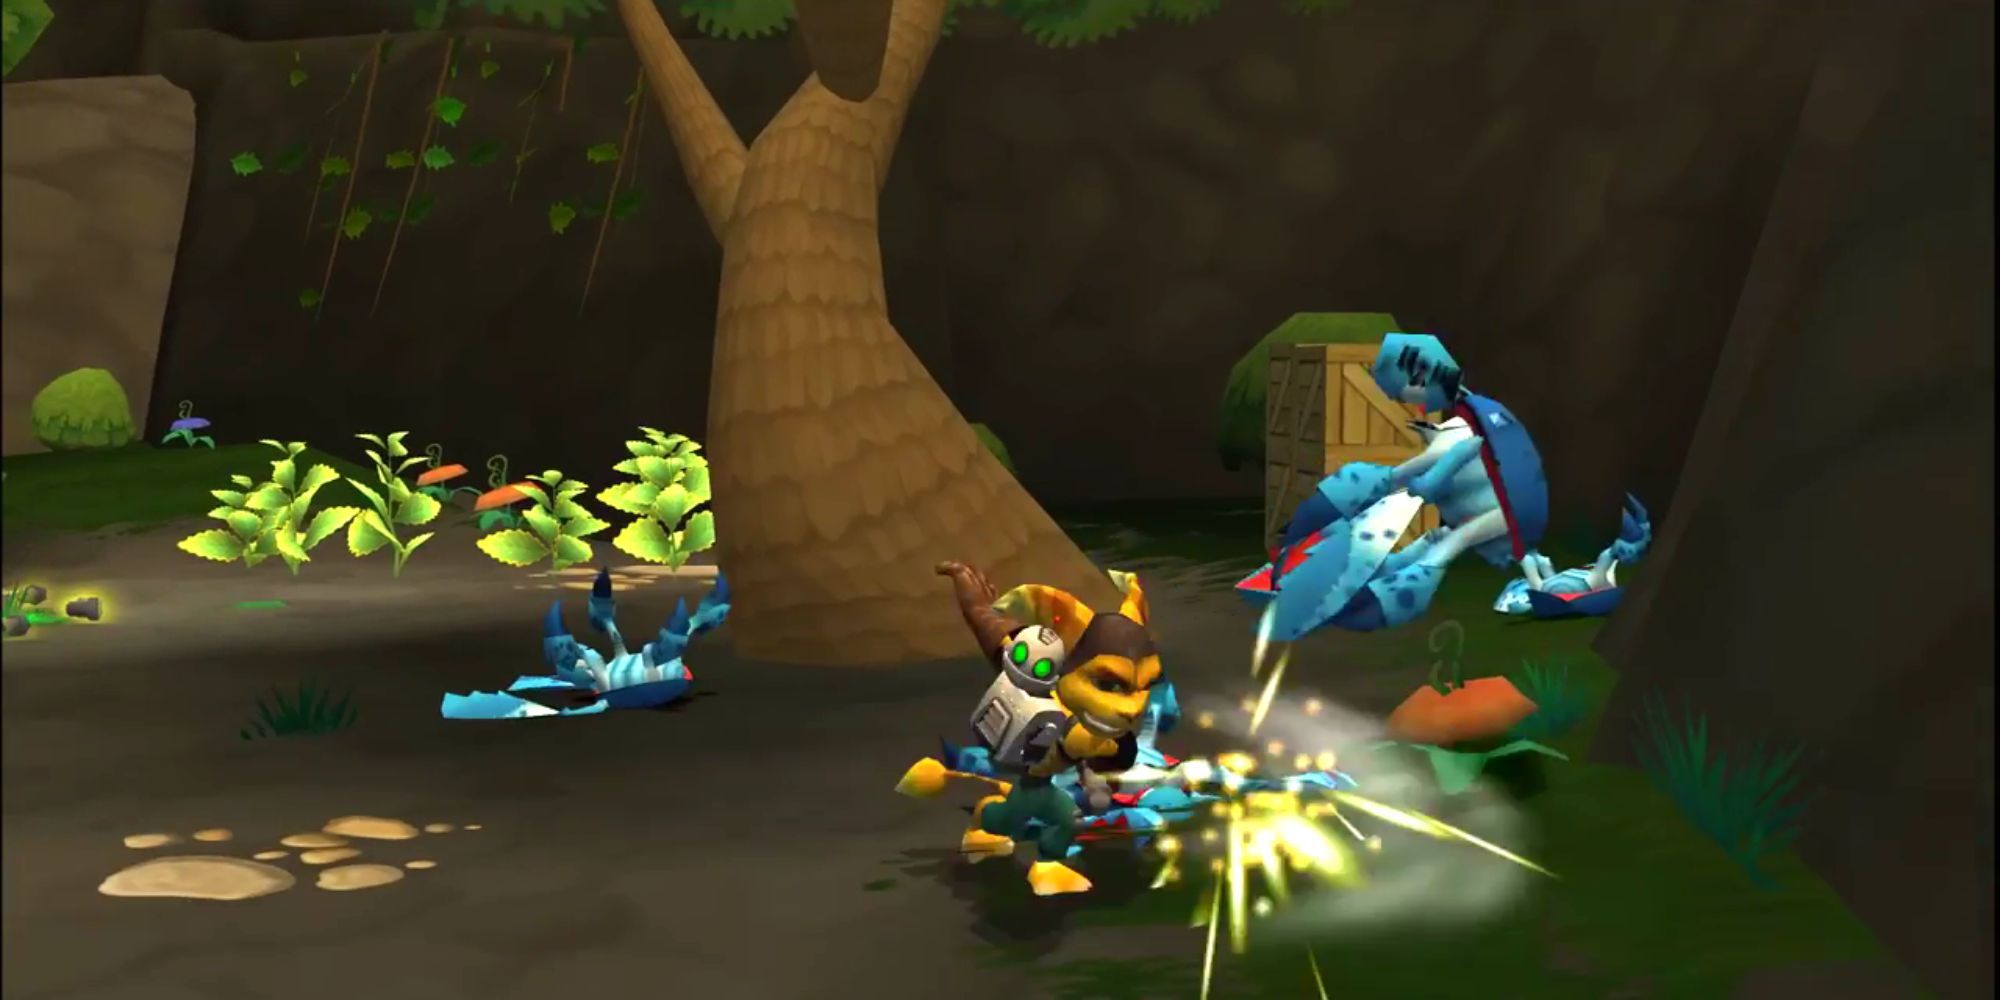 Ratchet attacks an enemy beside a tree